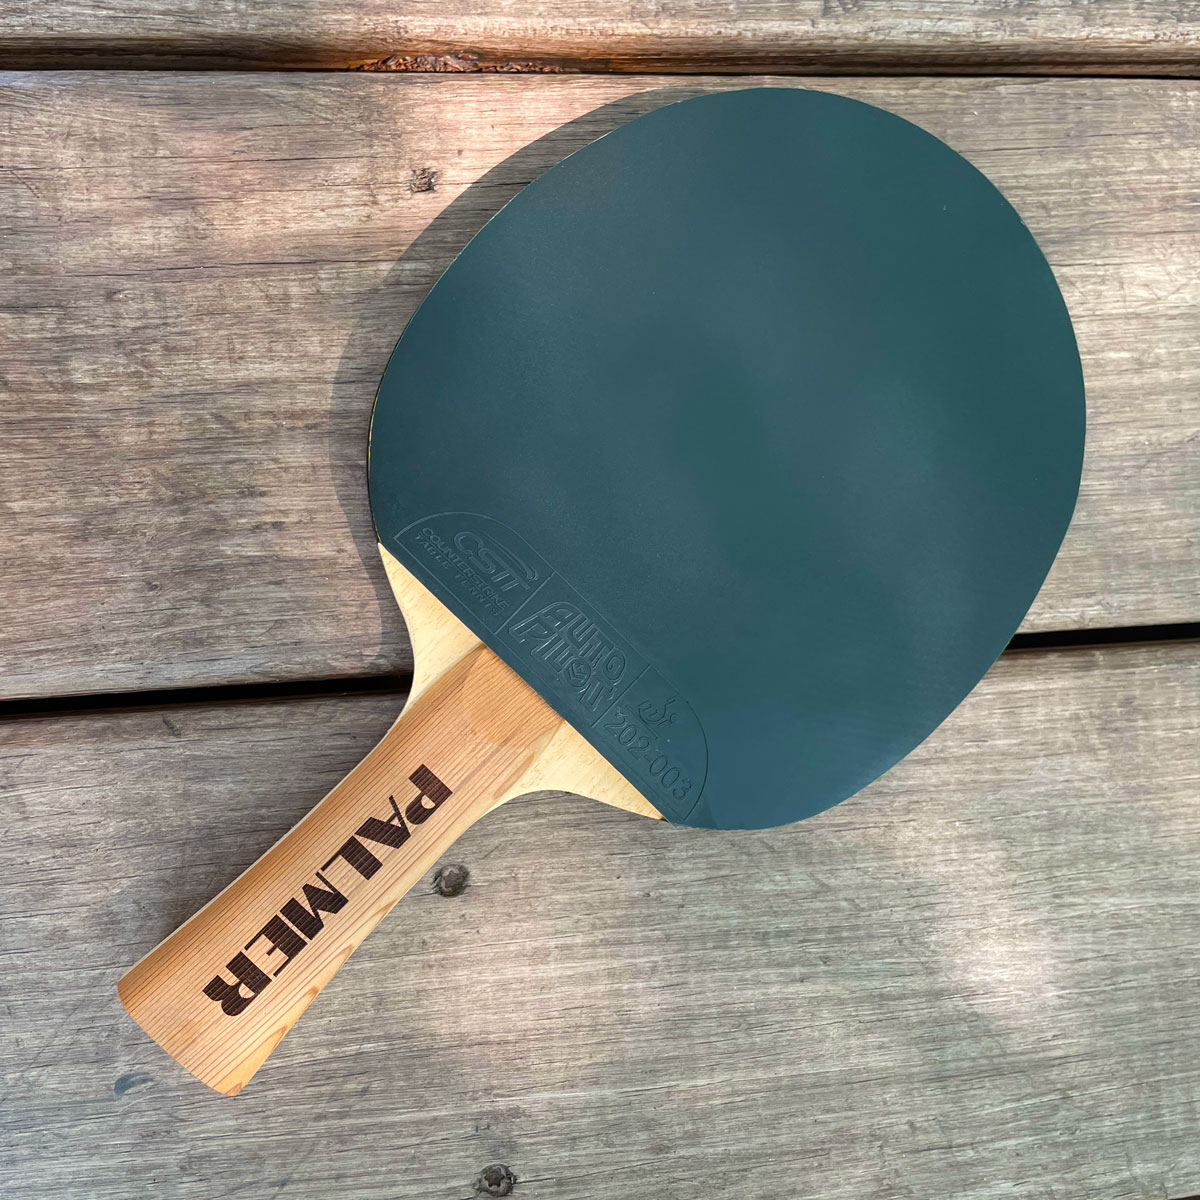 Custom Ping Pong Paddle Create Your Own! CounterStrike Table Tennis